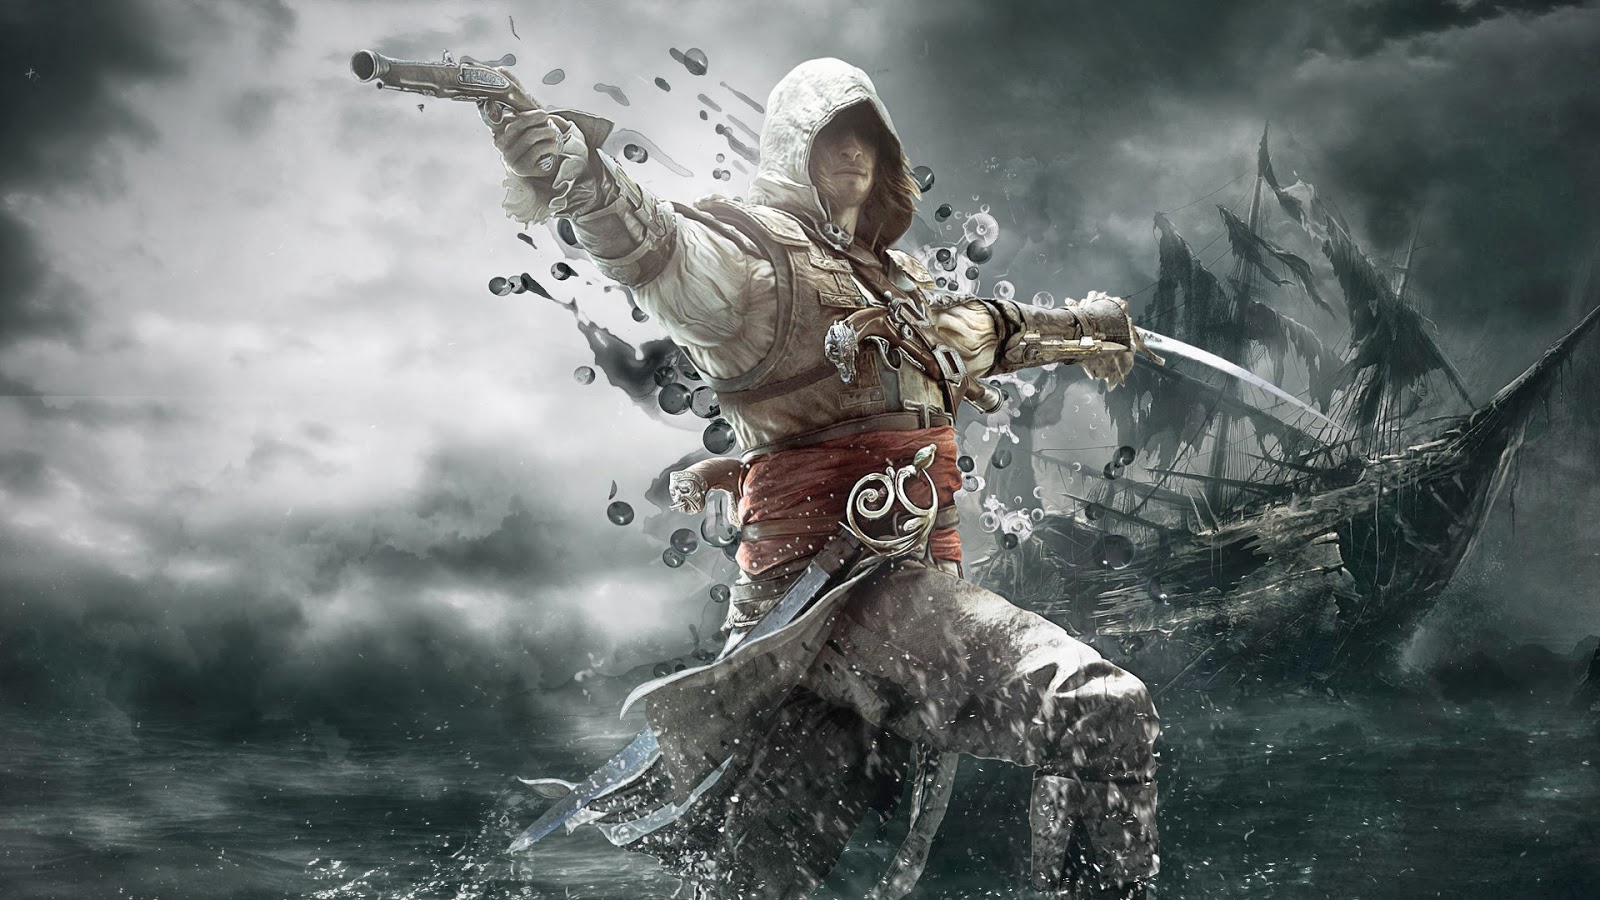 assassin's creed black flag wallpaper,action adventure game,cg artwork,pc game,adventure game,games